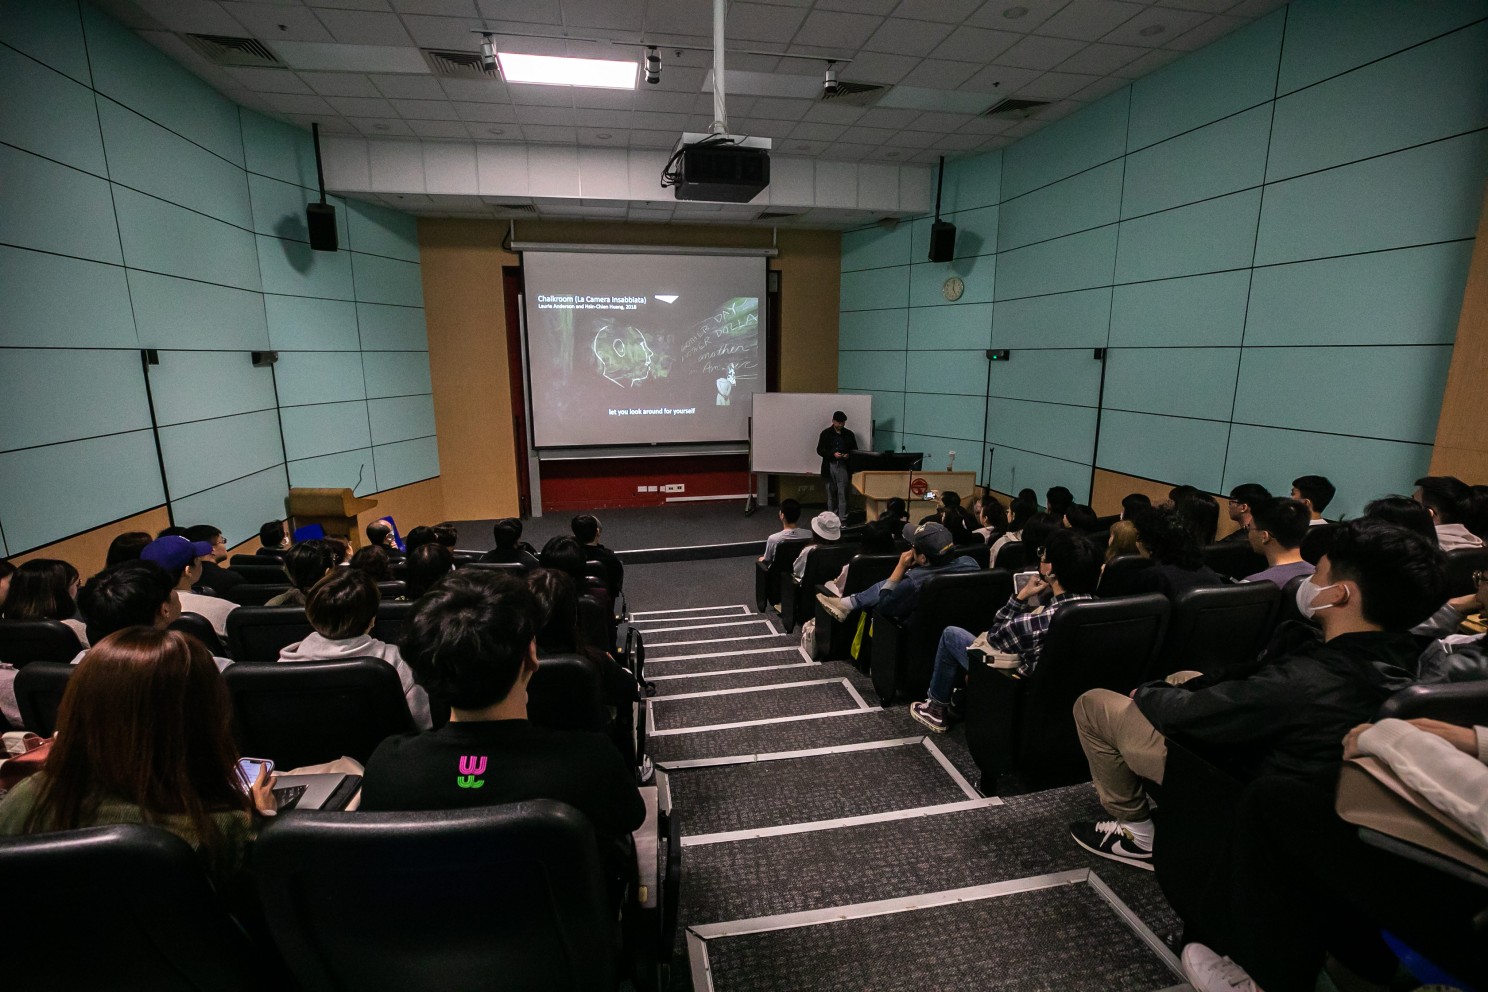 XR Gold Award-winning director Huang Hsin-chien describes immersive experience of VR works to students